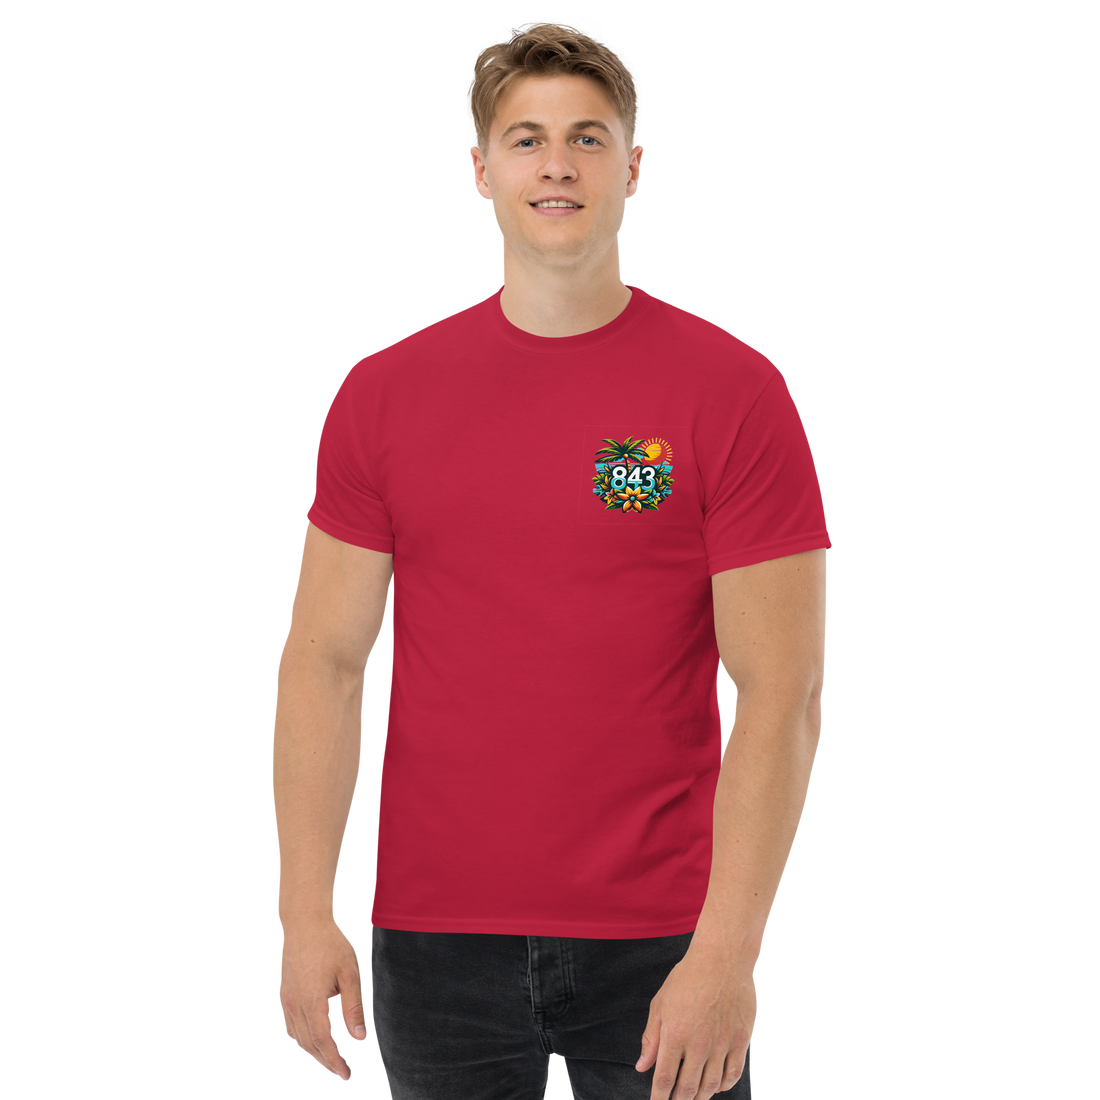 843 Cherry Grove Party Never Ends Men's classic tee